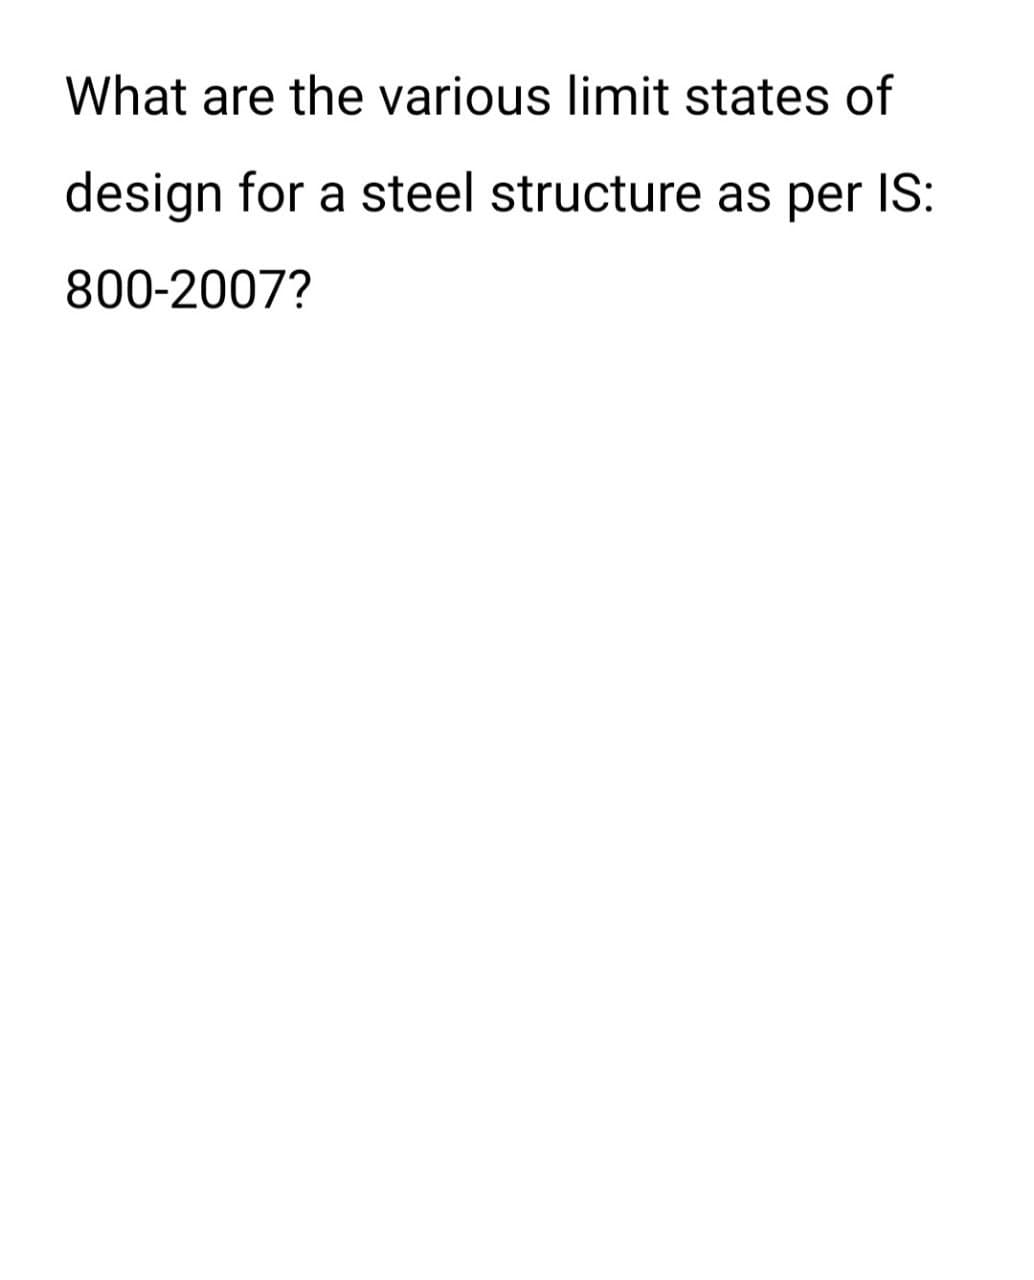 What are the various limit states of
design for a steel structure as per IS:
800-2007?